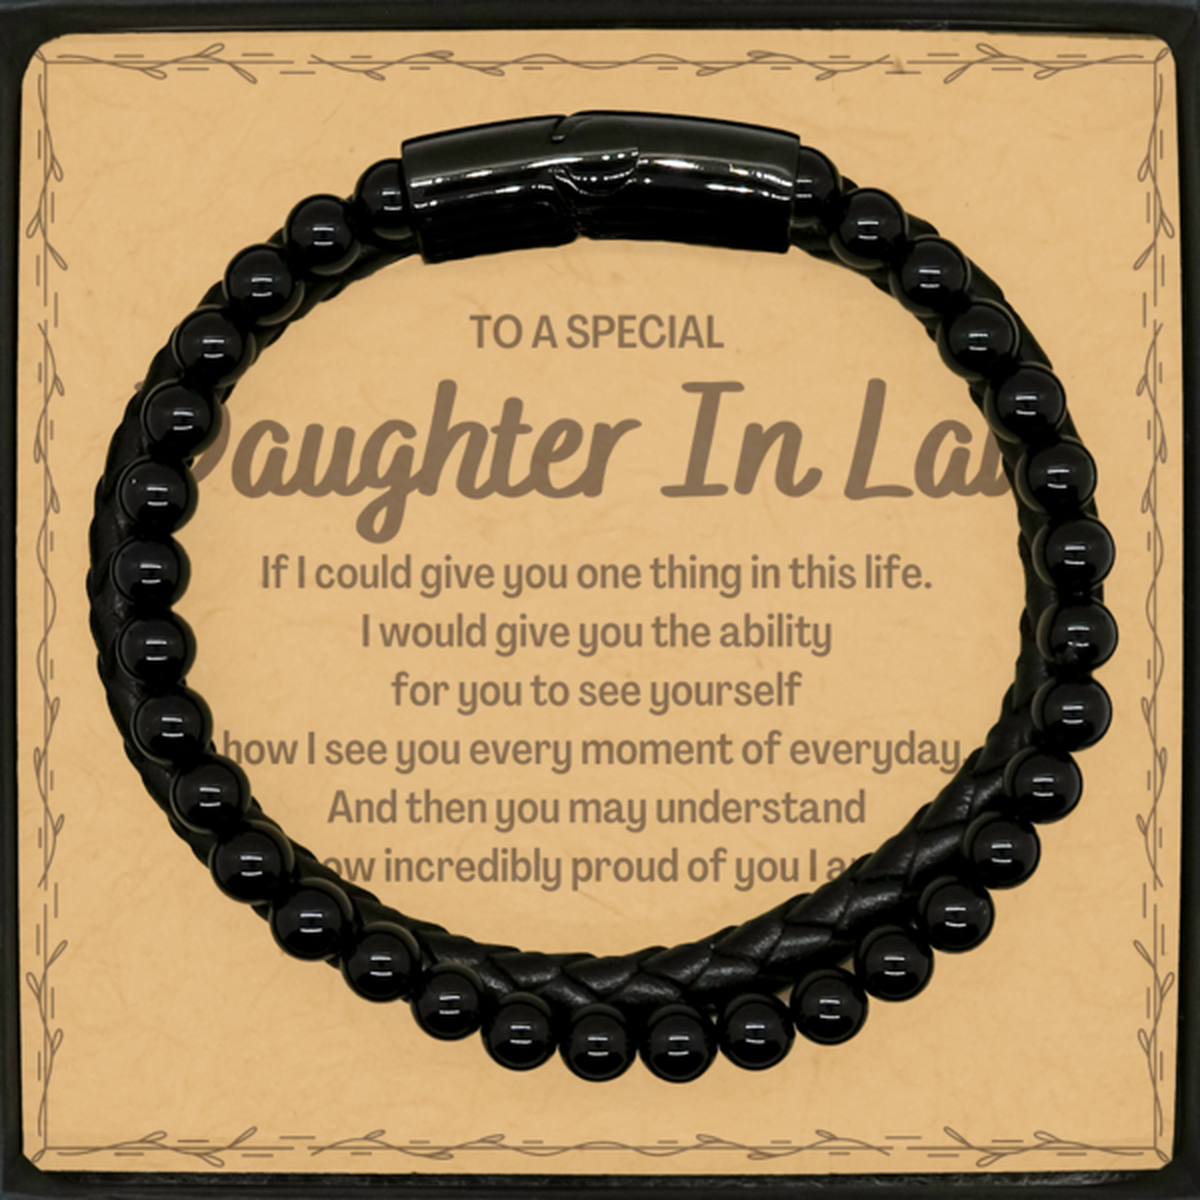 To My Daughter In Law Stone Leather Bracelets, Gifts For Daughter In Law Message Card, Inspirational Gifts for Christmas Birthday, Epic Gifts for Daughter In Law To A Special Daughter In Law how incredibly proud of you I am